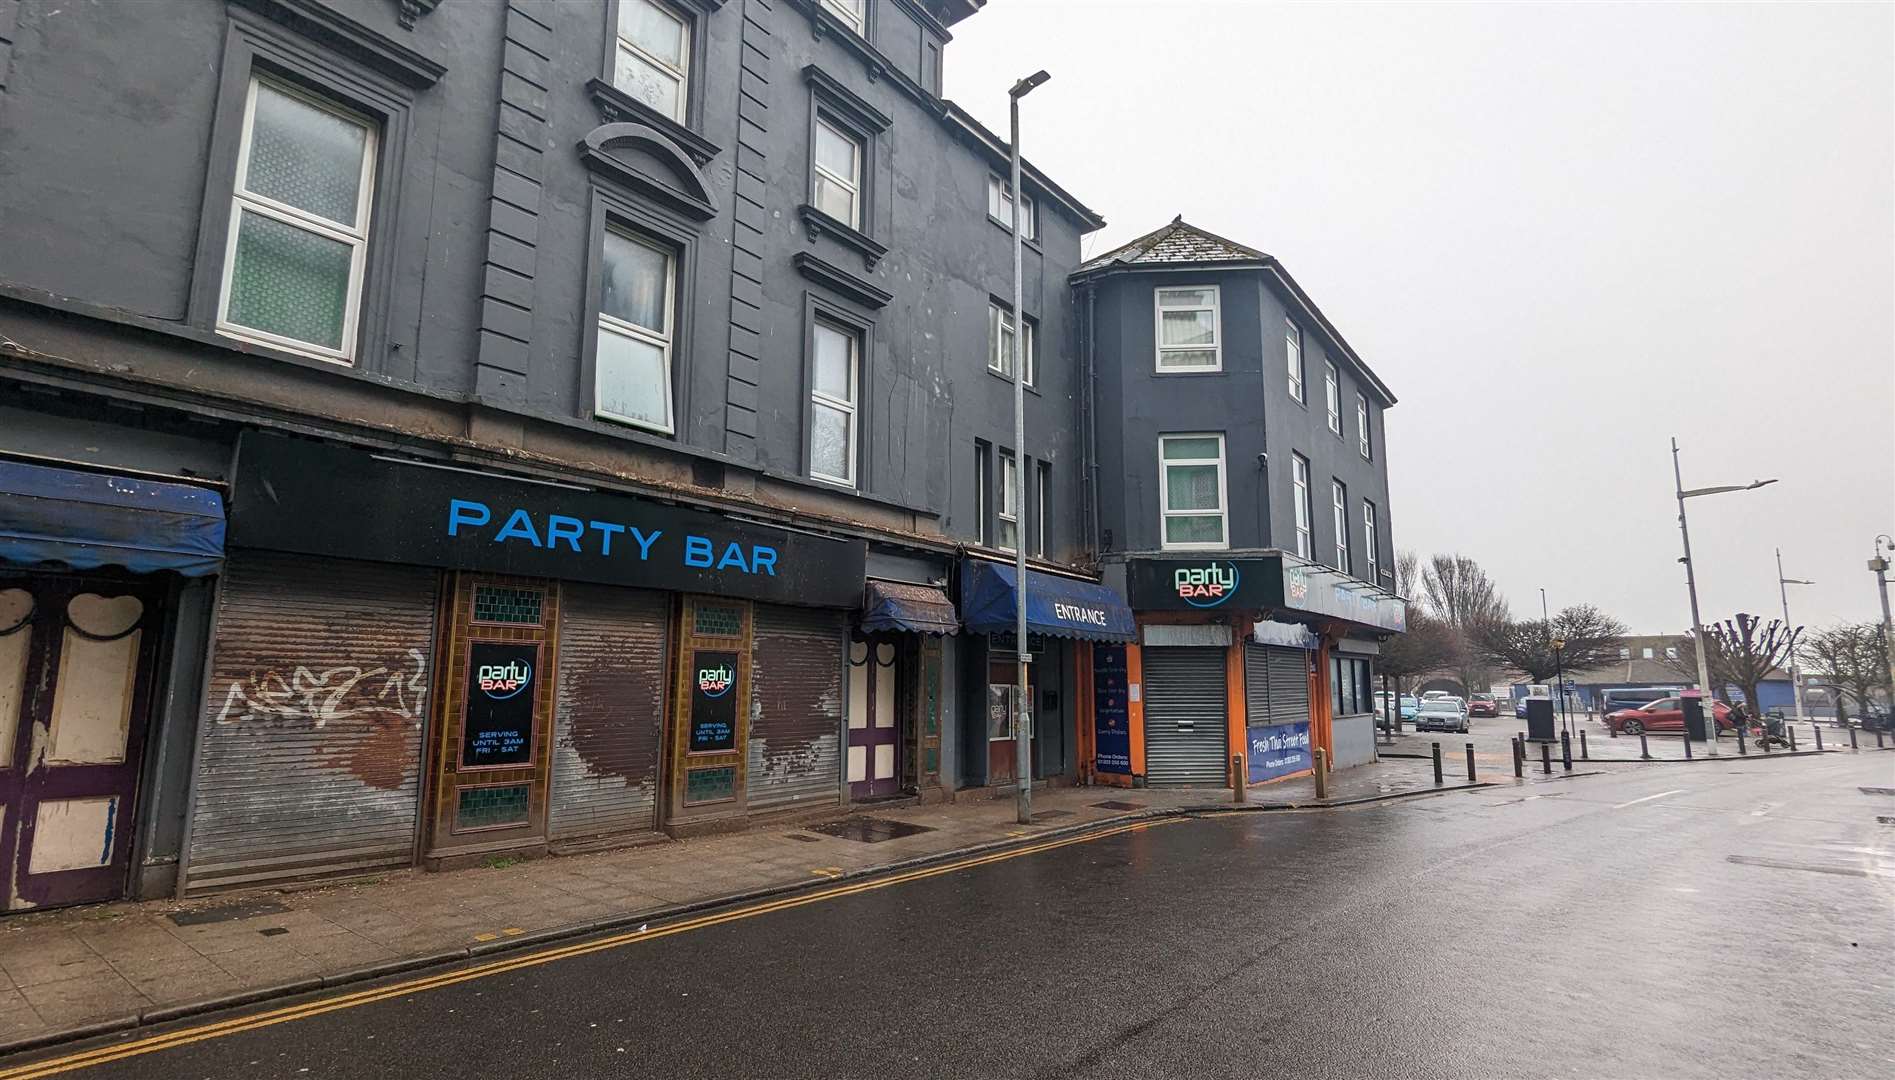 Shutters down at the Party Bar in Tontine Street on a grey weekday morning